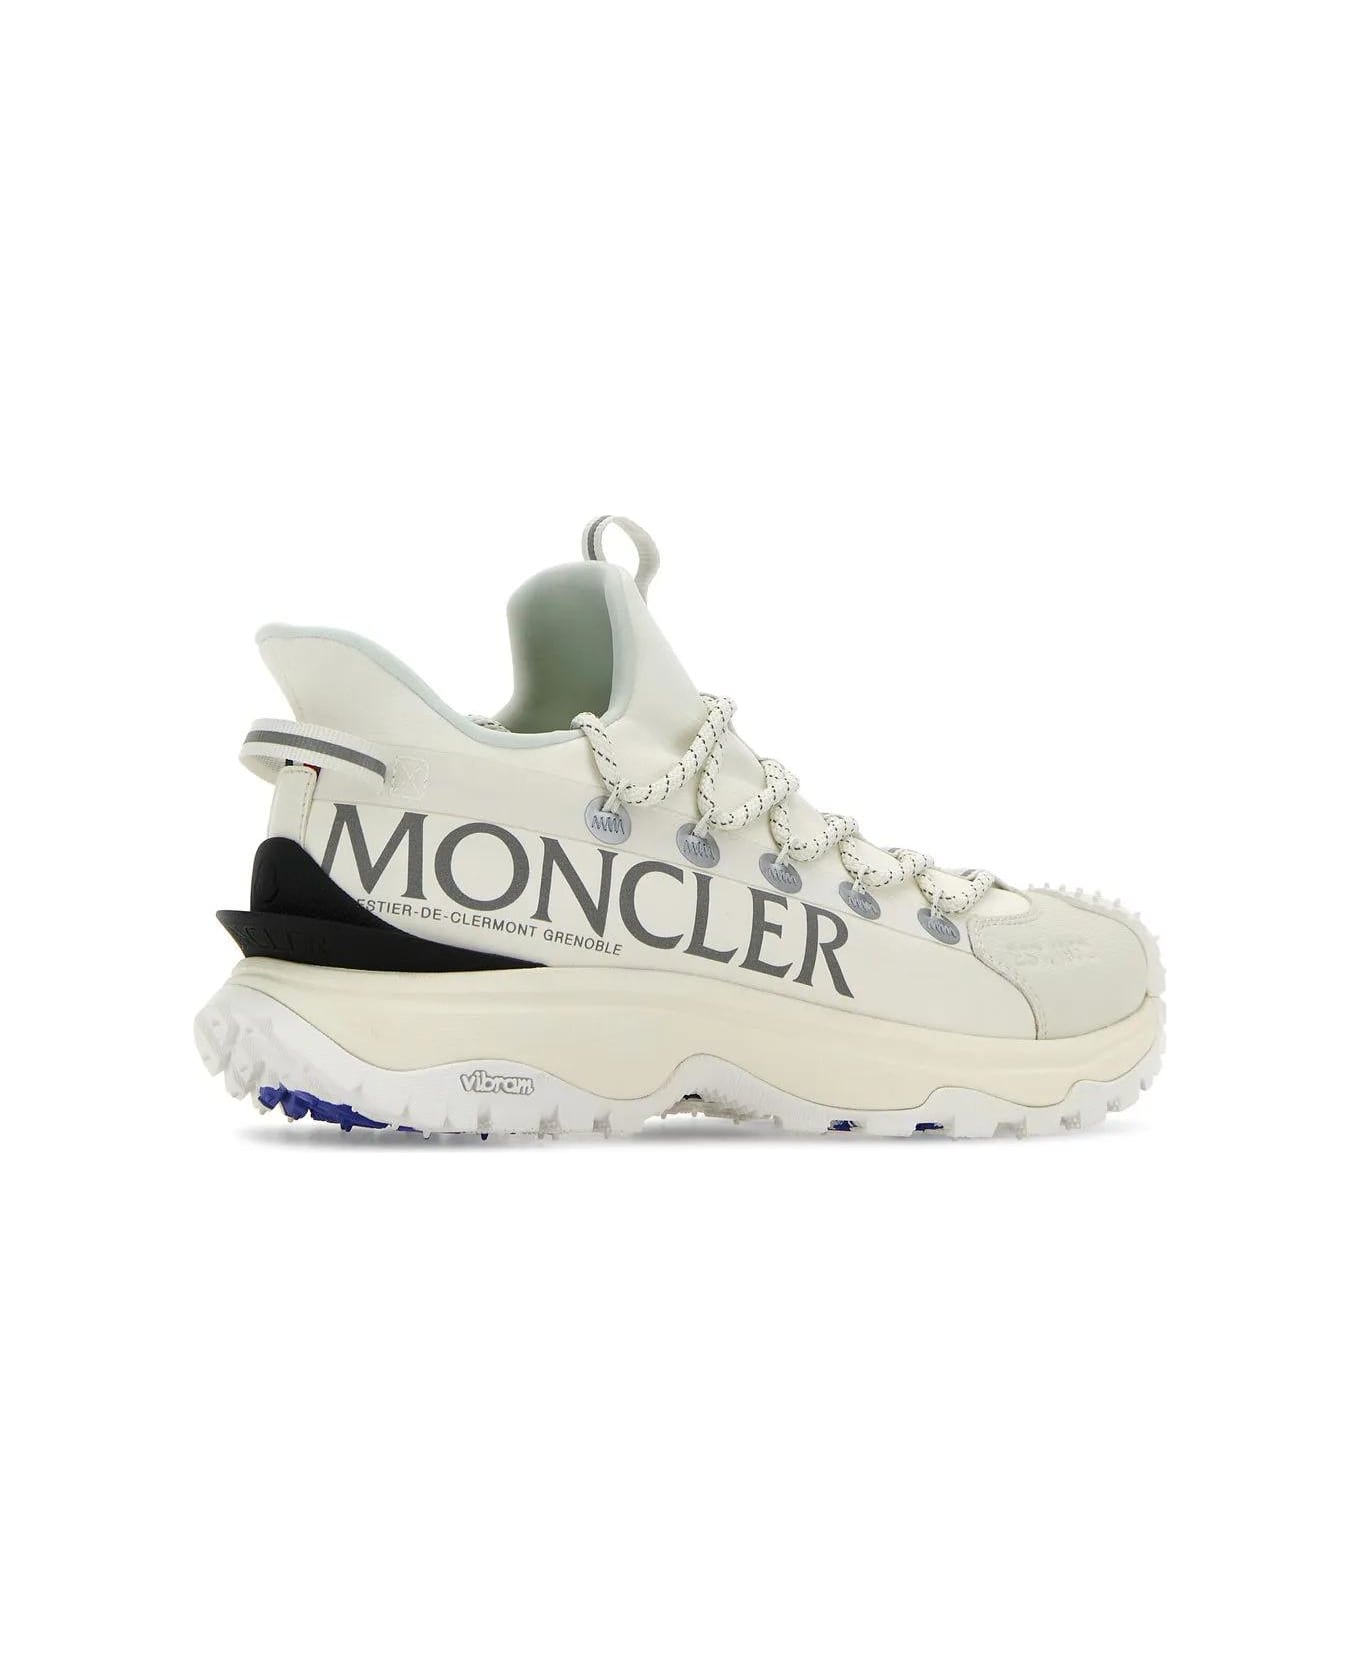 Moncler White Fabric And Rubber Trailgrip Lite2 Sneakers - White